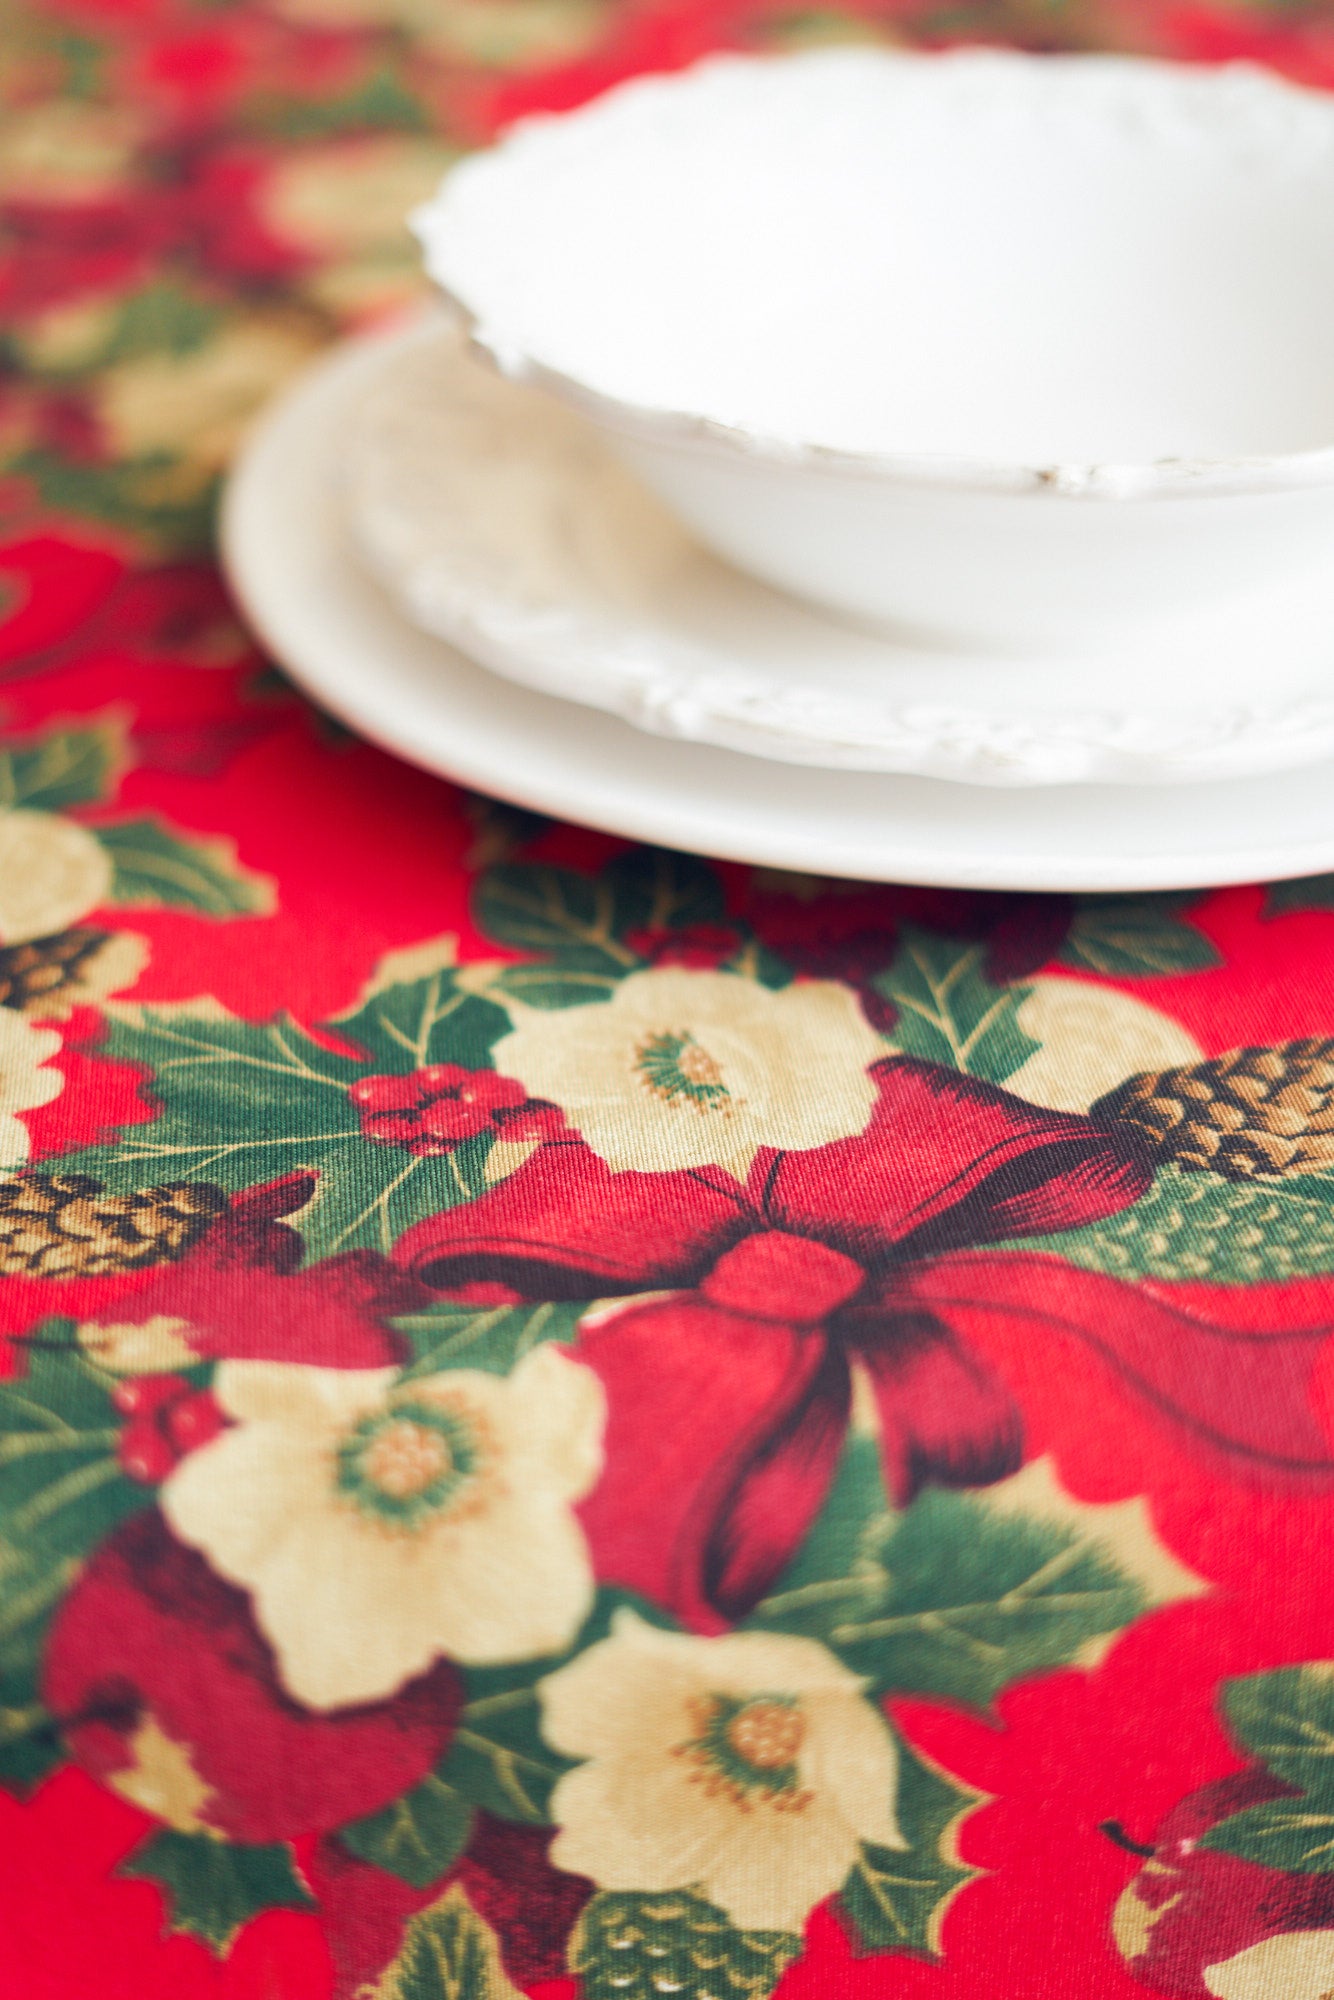 Winter Table runner with Tassels | Red Christmas flowers